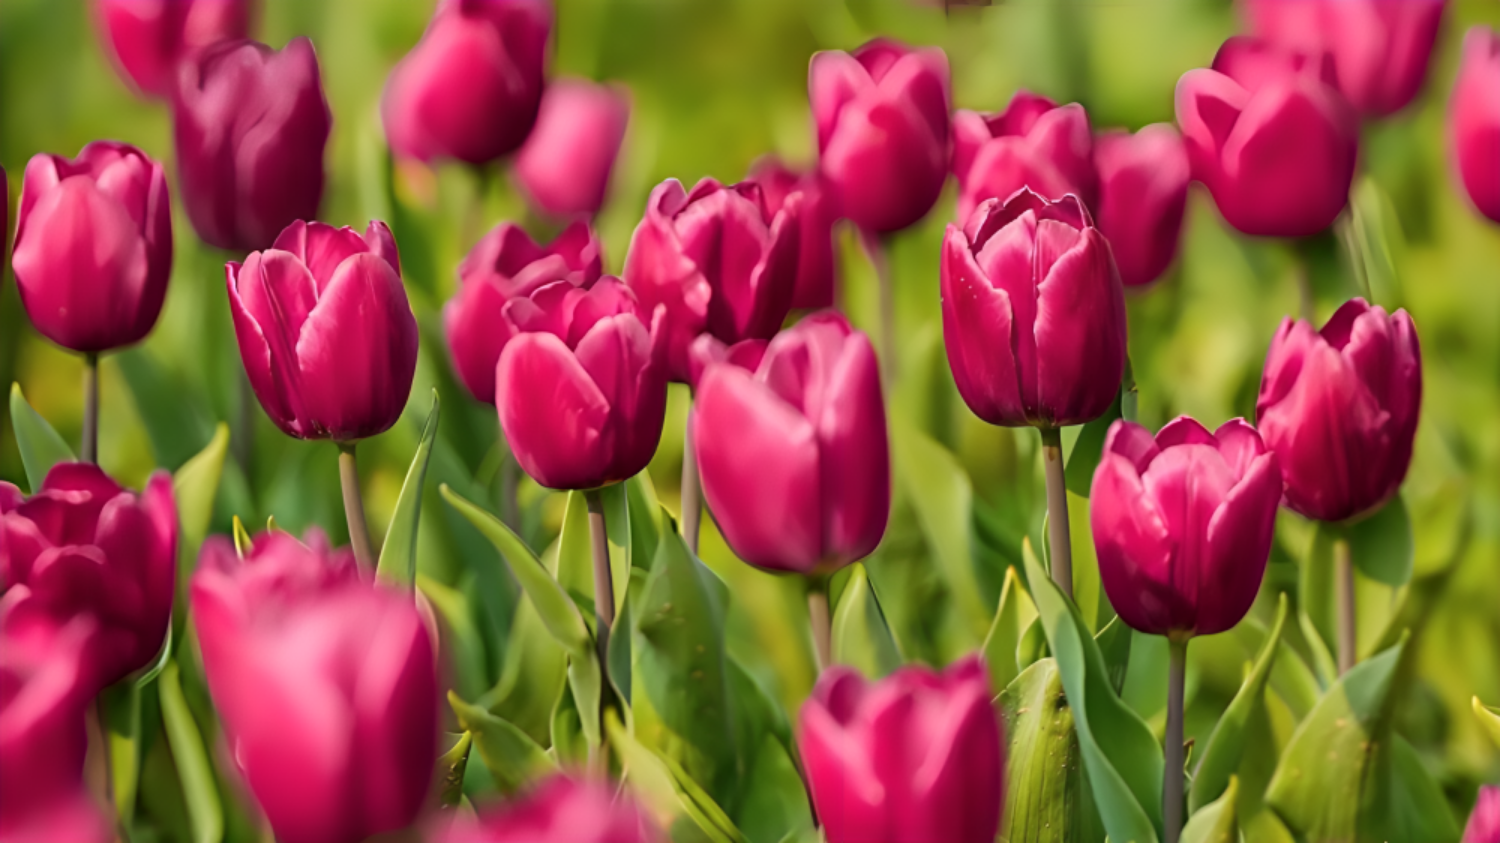 If you are visiting Delhi, then you must visit the Tulip Festival की तस्वीर